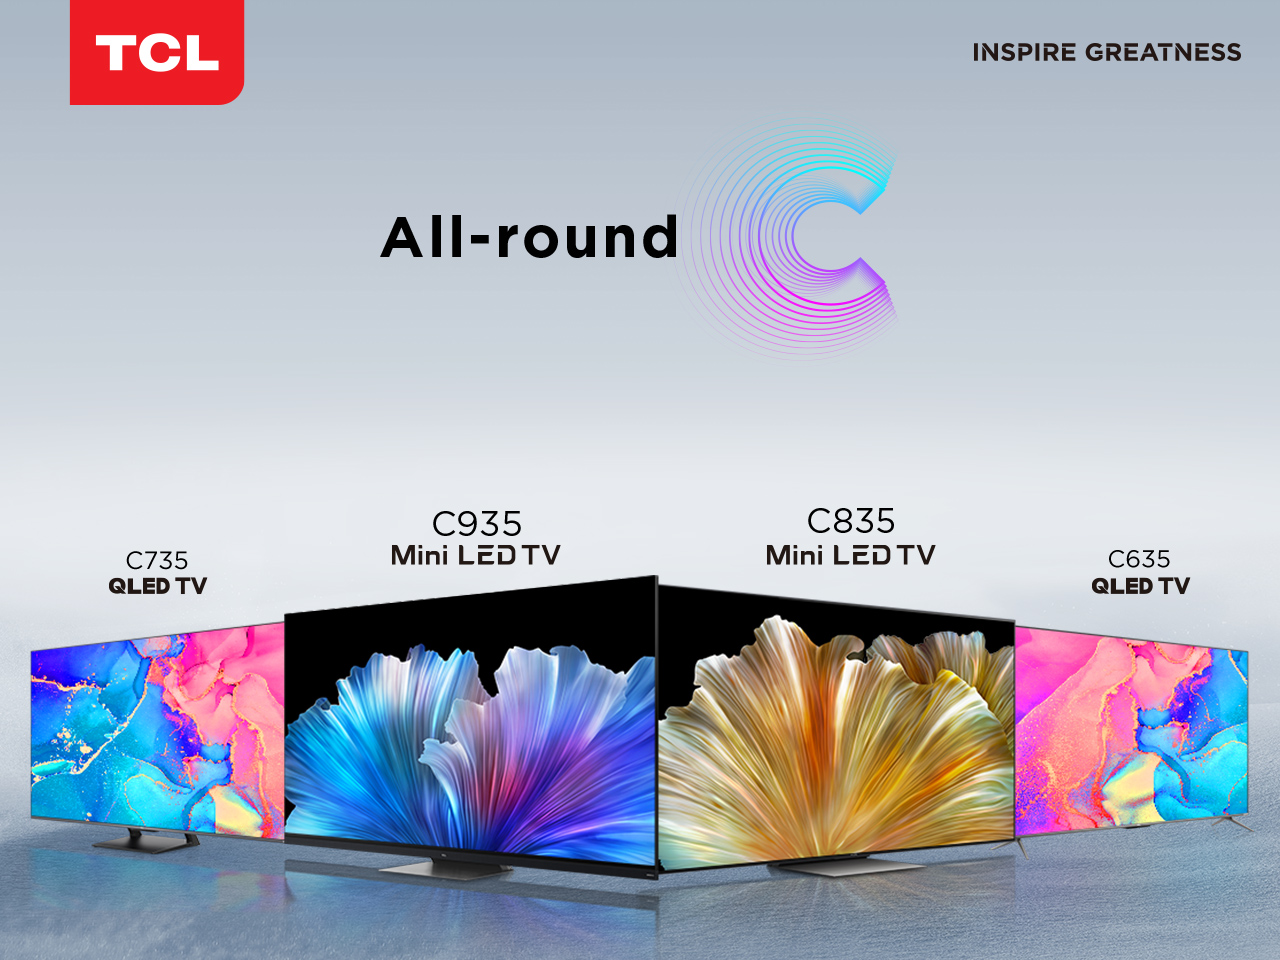 TCL launches the C-Series of LED TVs, the latest series of Premium Mini LED TVs and QLED TVs in Pakistan with groundbreaking technology. 